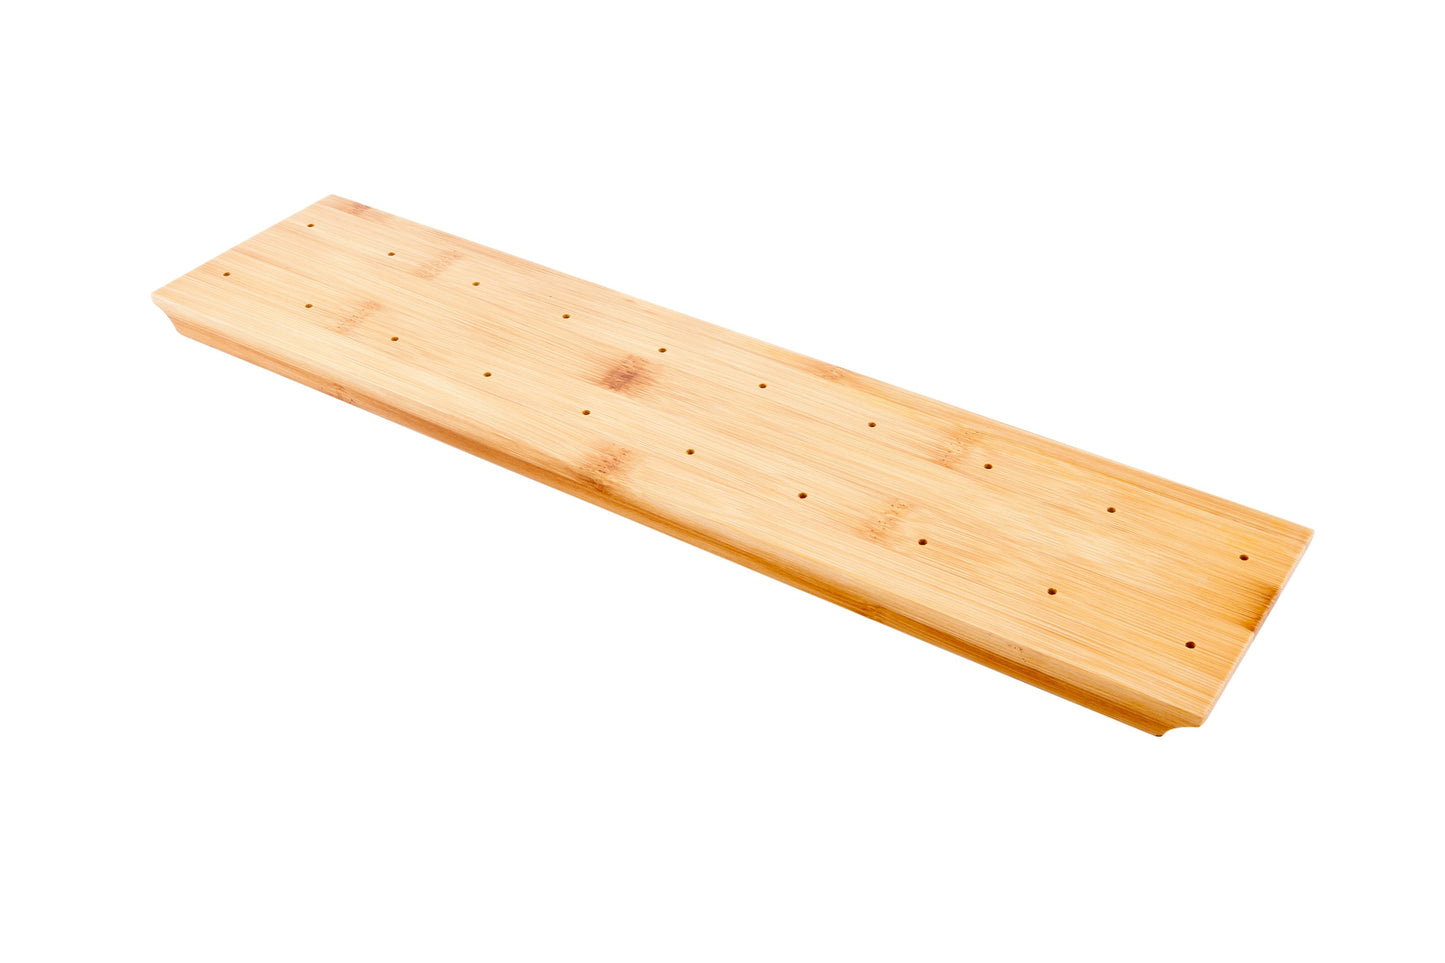 Bamboo Reversible Skewer Holder 20 holes 1 count box